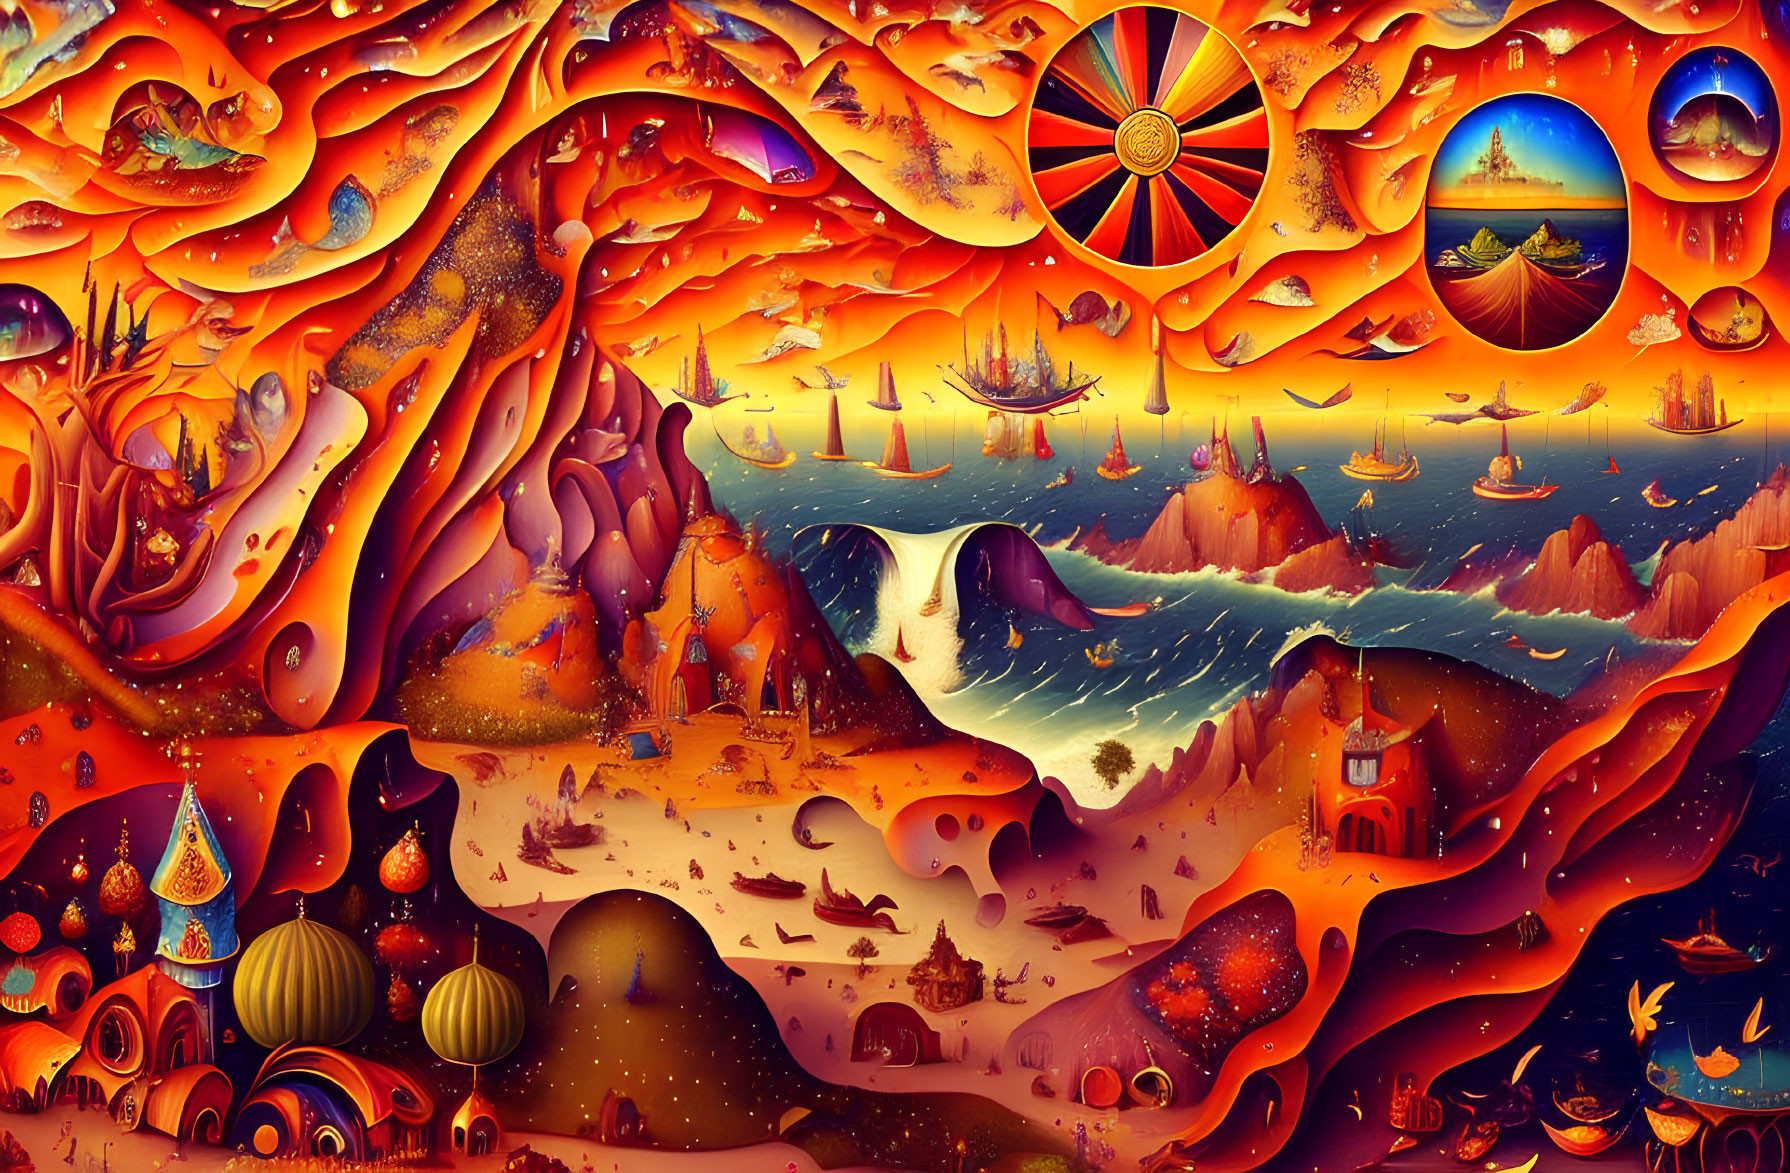 Surreal landscape with fiery colors, blending waves, desert, fantastical buildings, ships, and